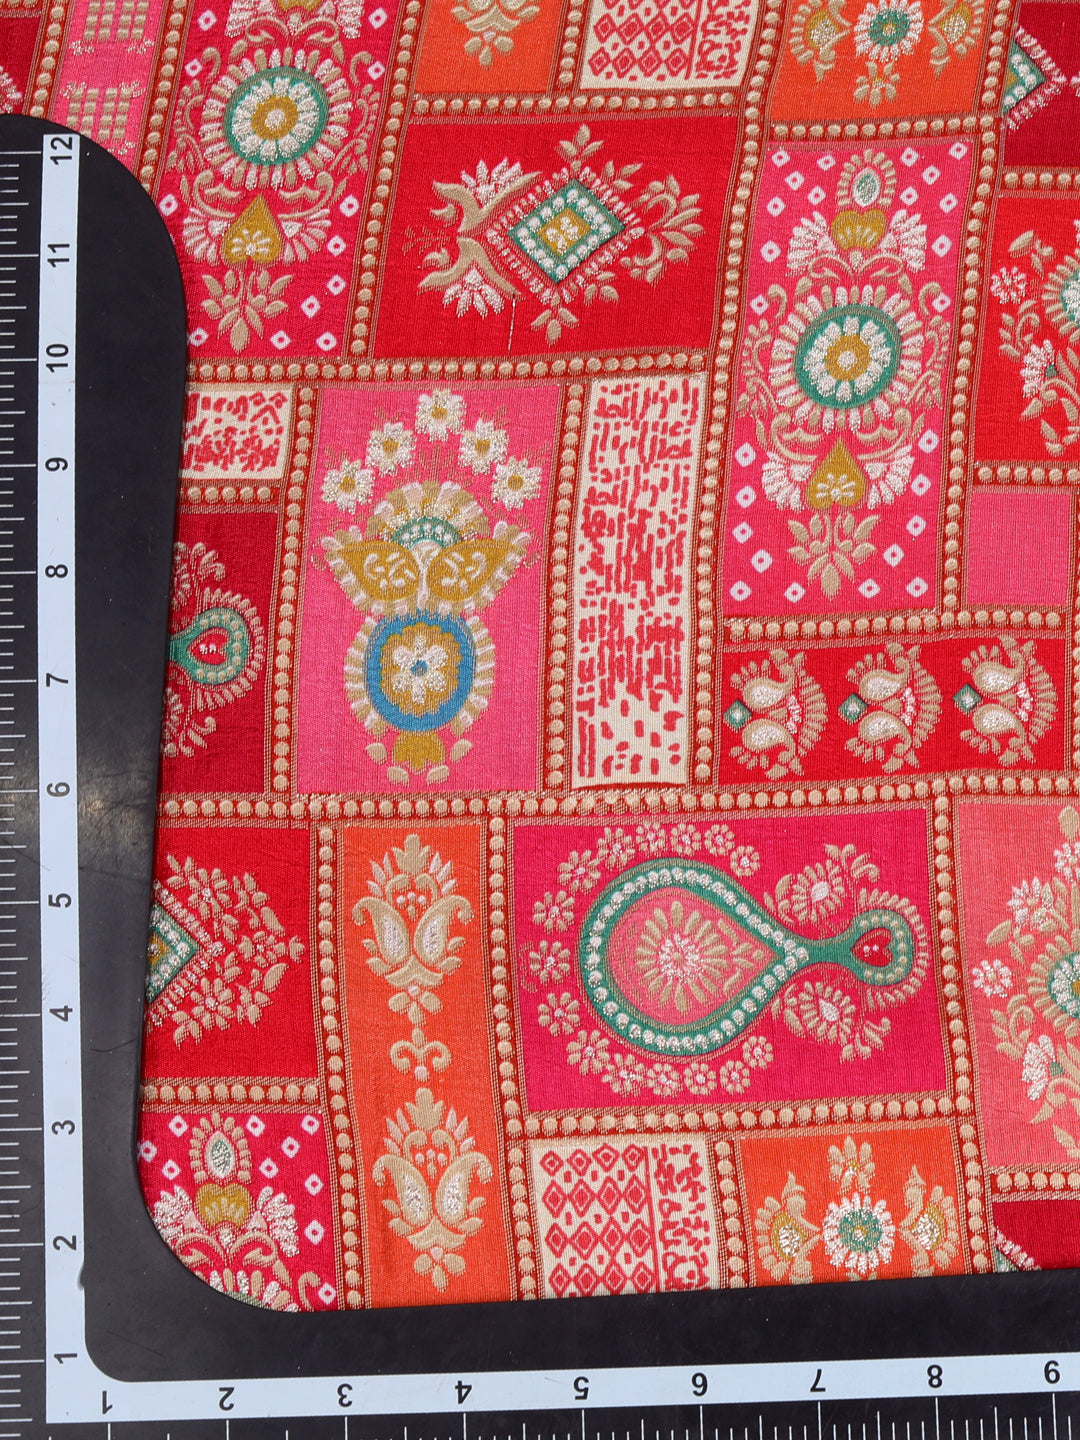 Red Tussar Silk With Checks & Floral Print